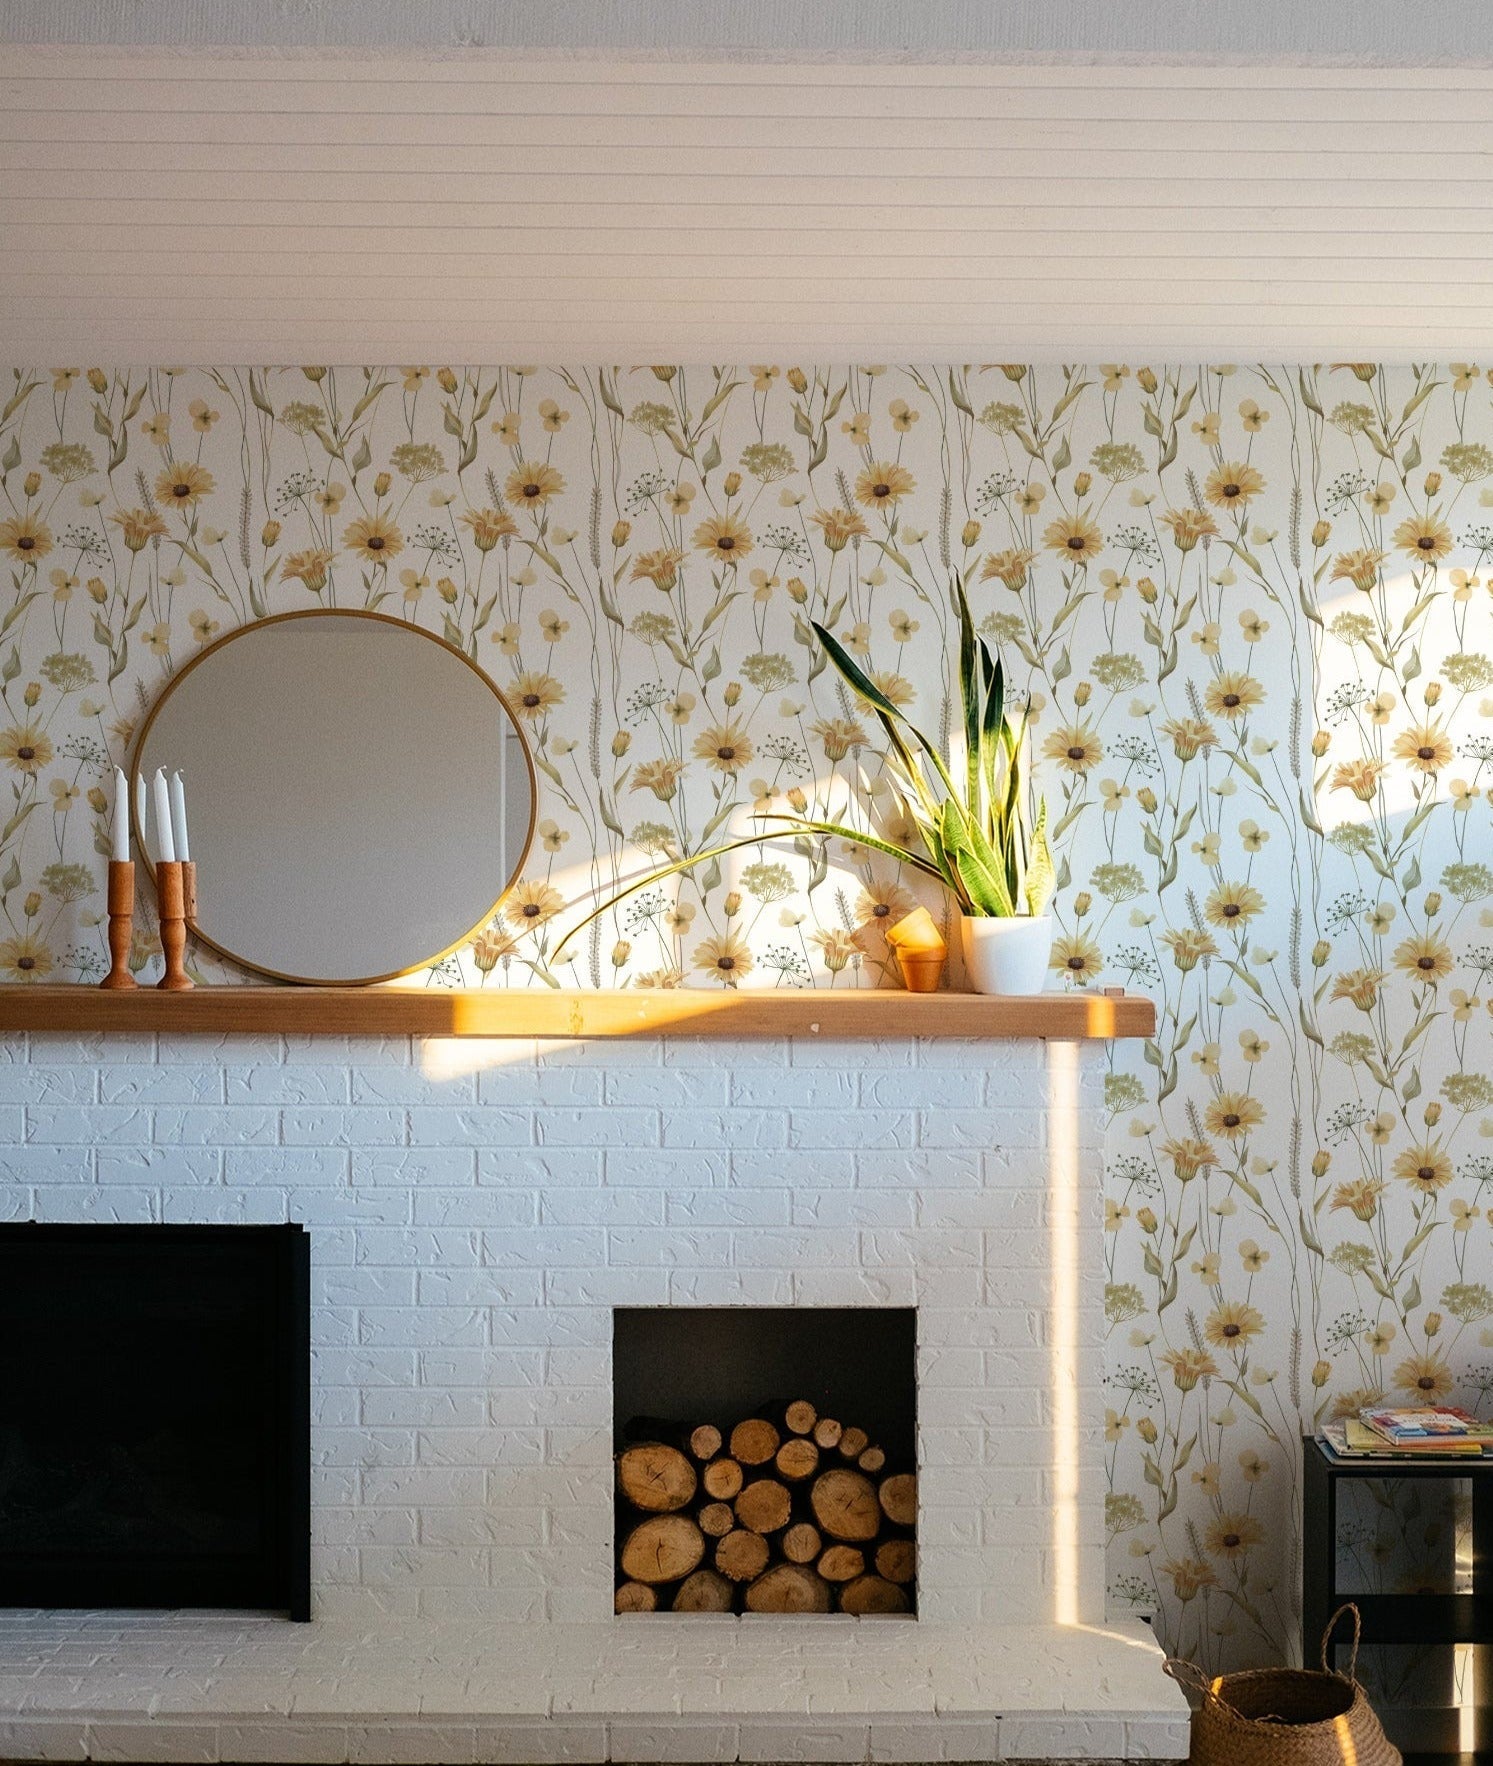 A living space brightened by the Watercolour Sunflower Wallpaper, which provides a joyful backdrop to a white-painted brick fireplace and mantel decorated with candles and a houseplant, reflecting a homely and natural ambiance.